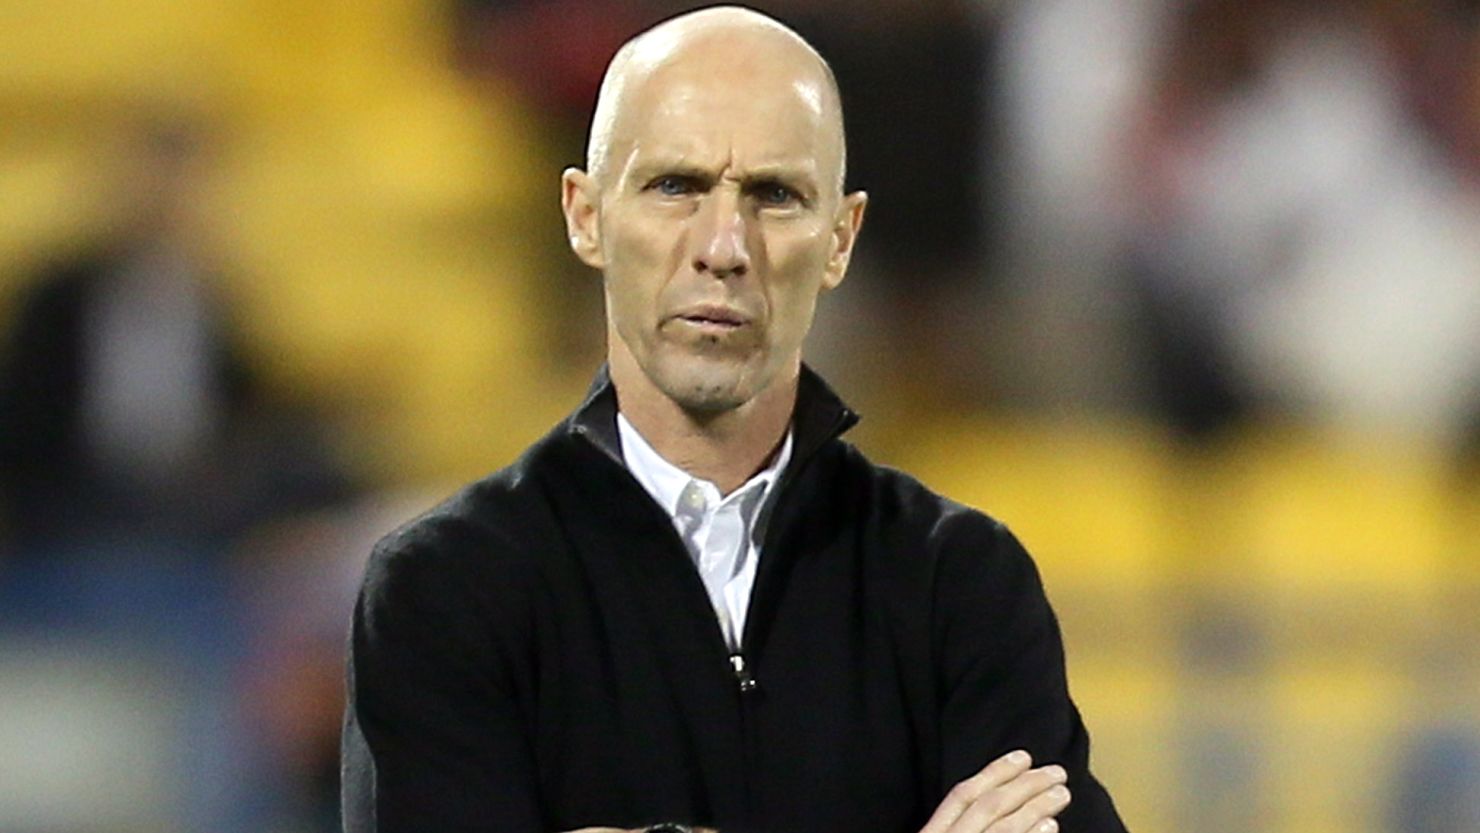 Former U.S. national coach Bob Bradley is hoping to end Egypt's 23-year wait for World Cup qualification.